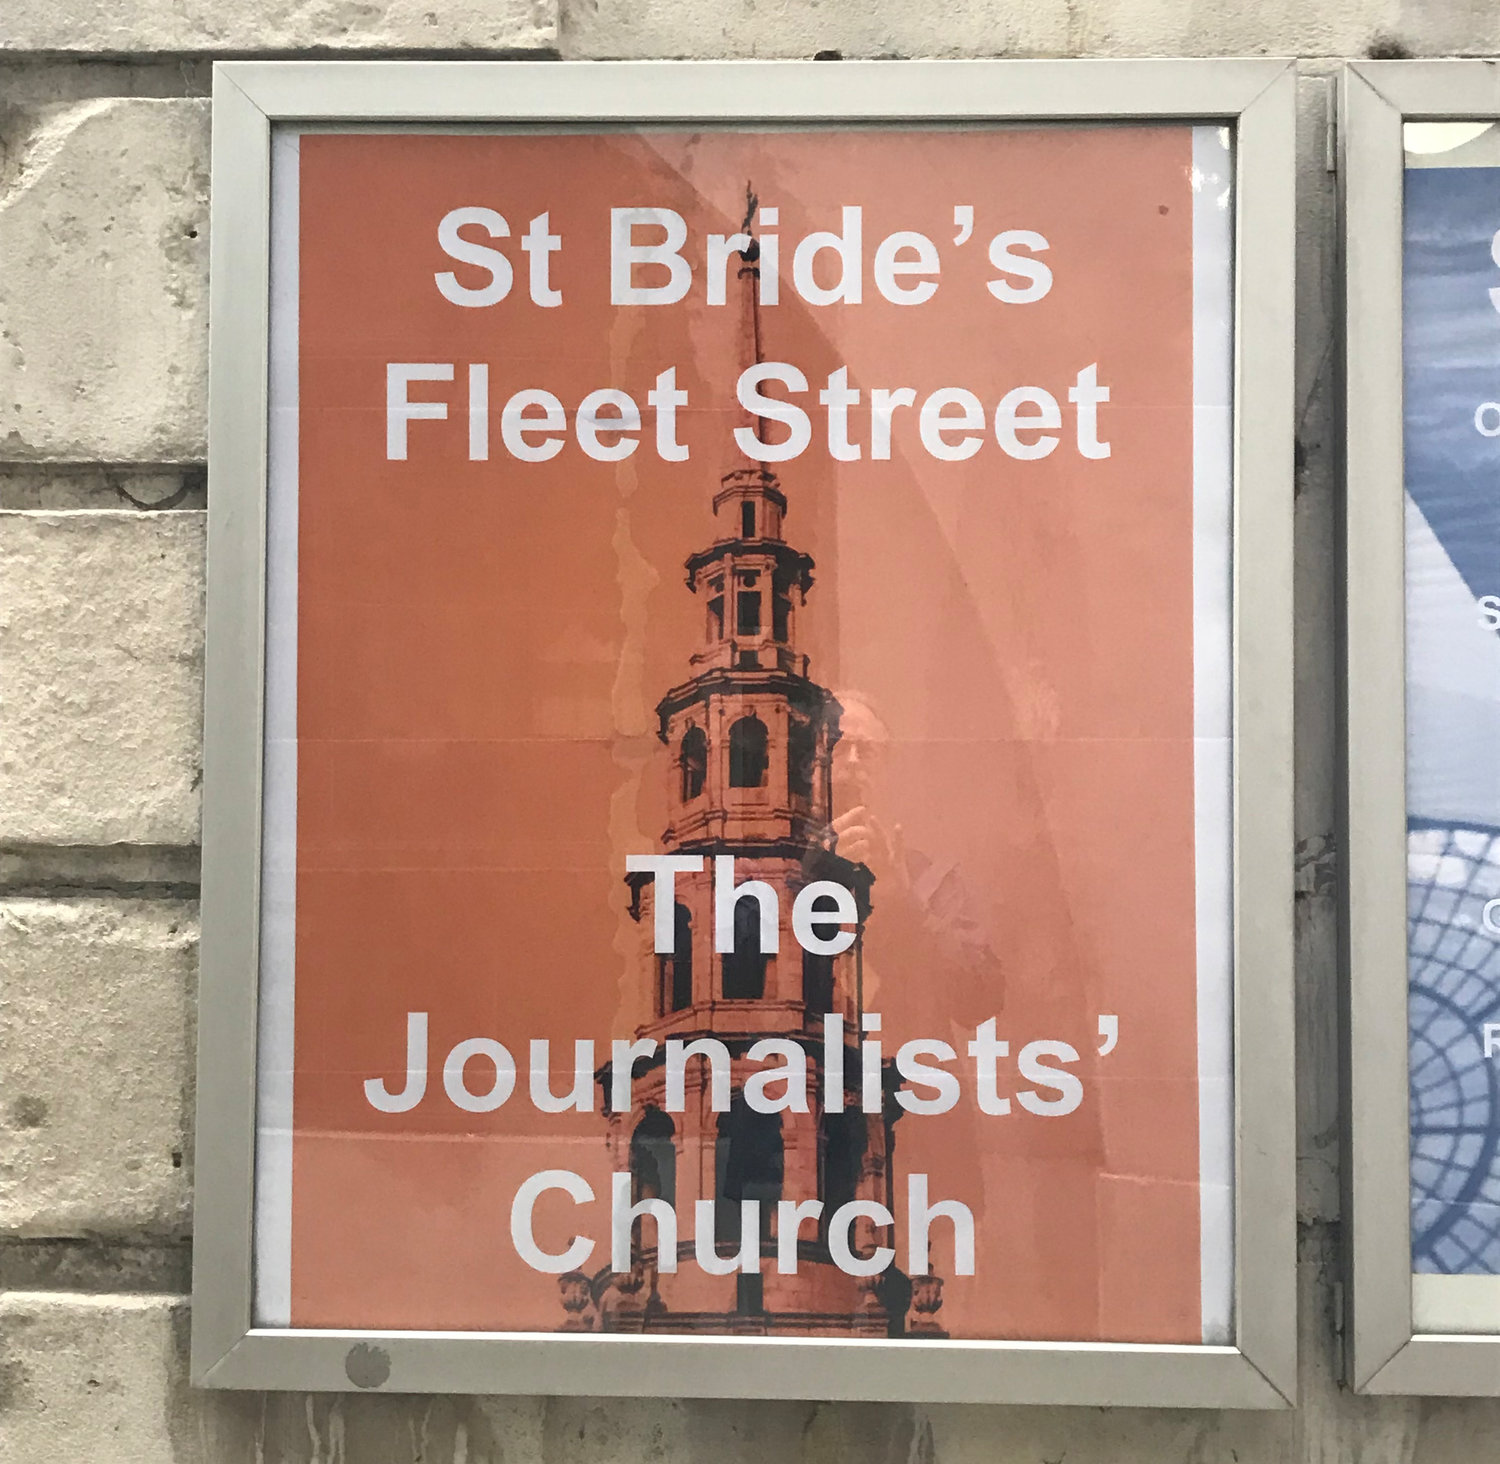 St Bride's is also known as "The Journalists' Church." (Photo/Charles Jones)